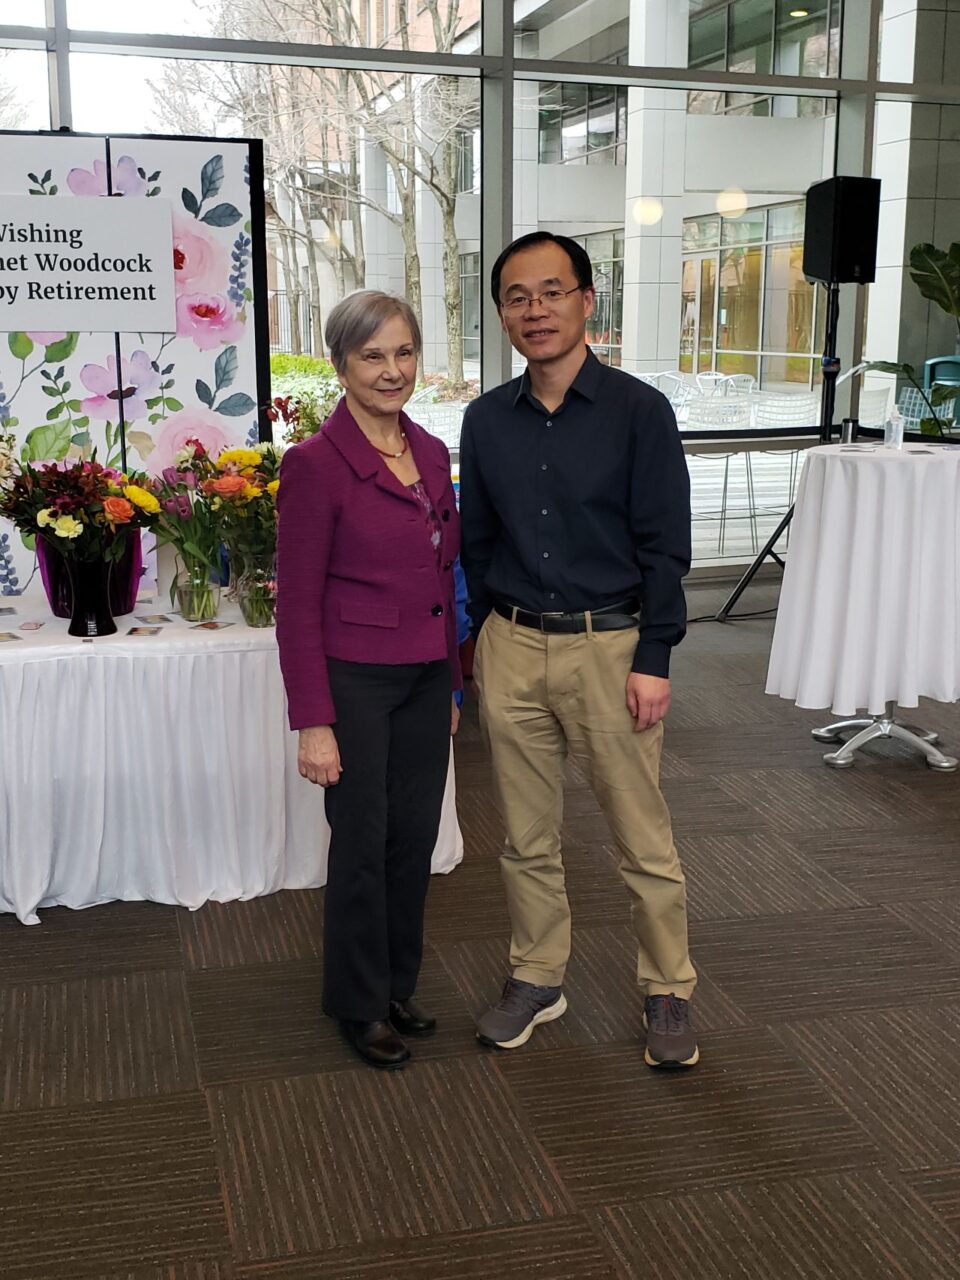 Zhiheng Xu: Janet Woodcock is an iconic figure at the FDA